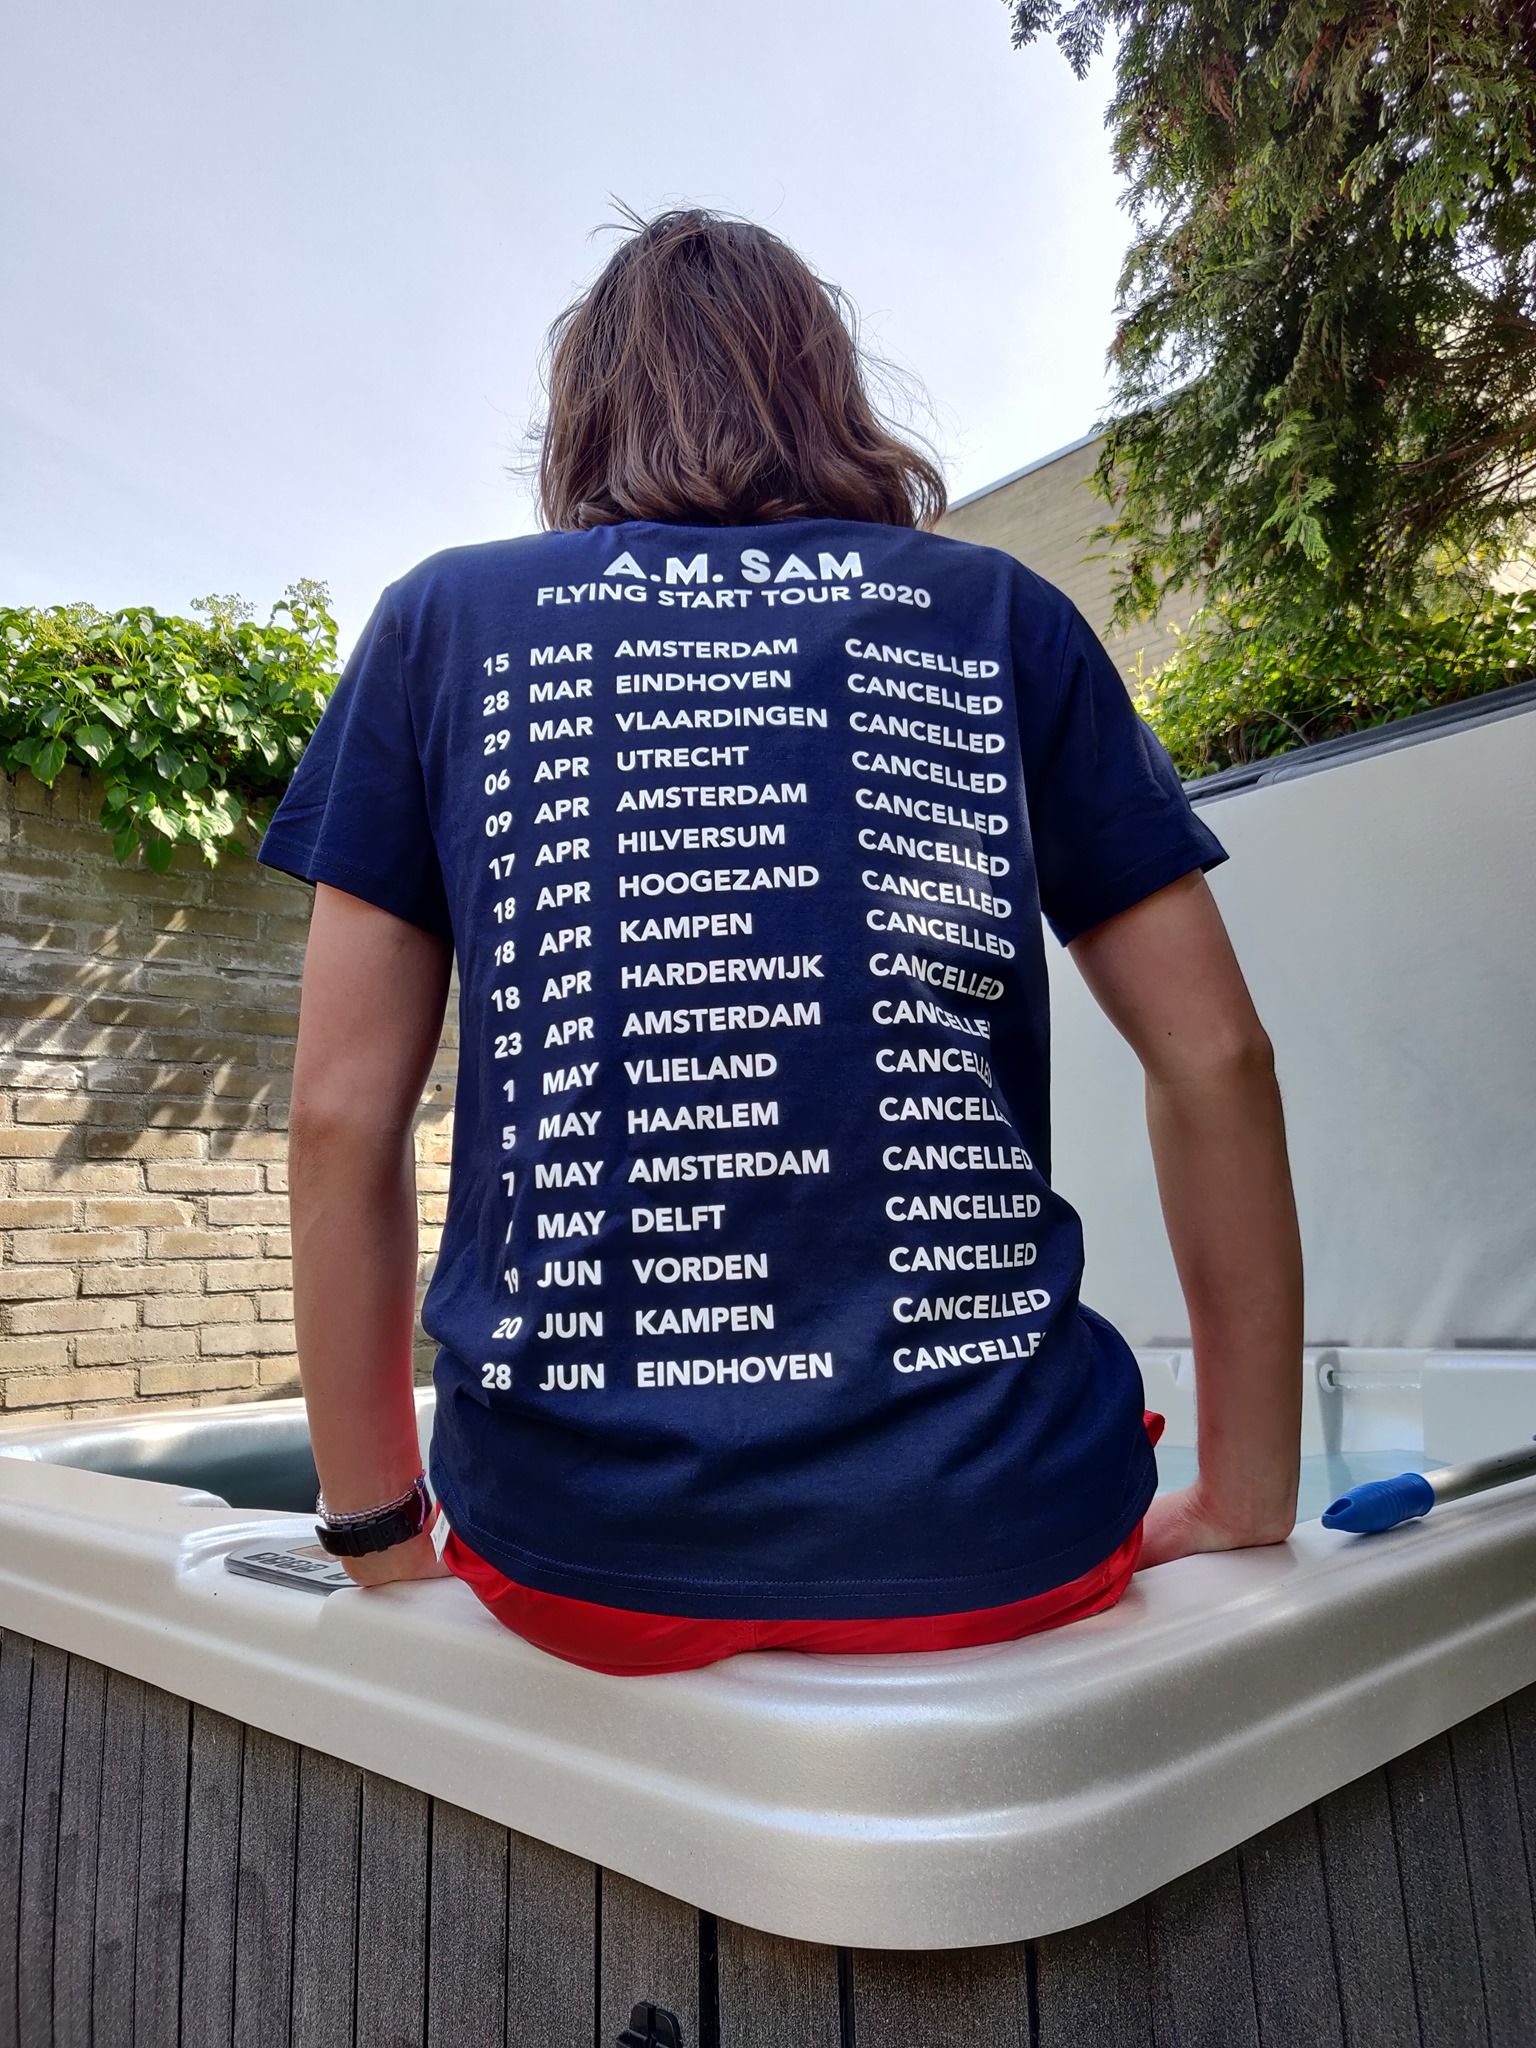 Dutch band A.M. Sam sees first tour cancelled due to coronavirus - Goes ahead with tour shirt